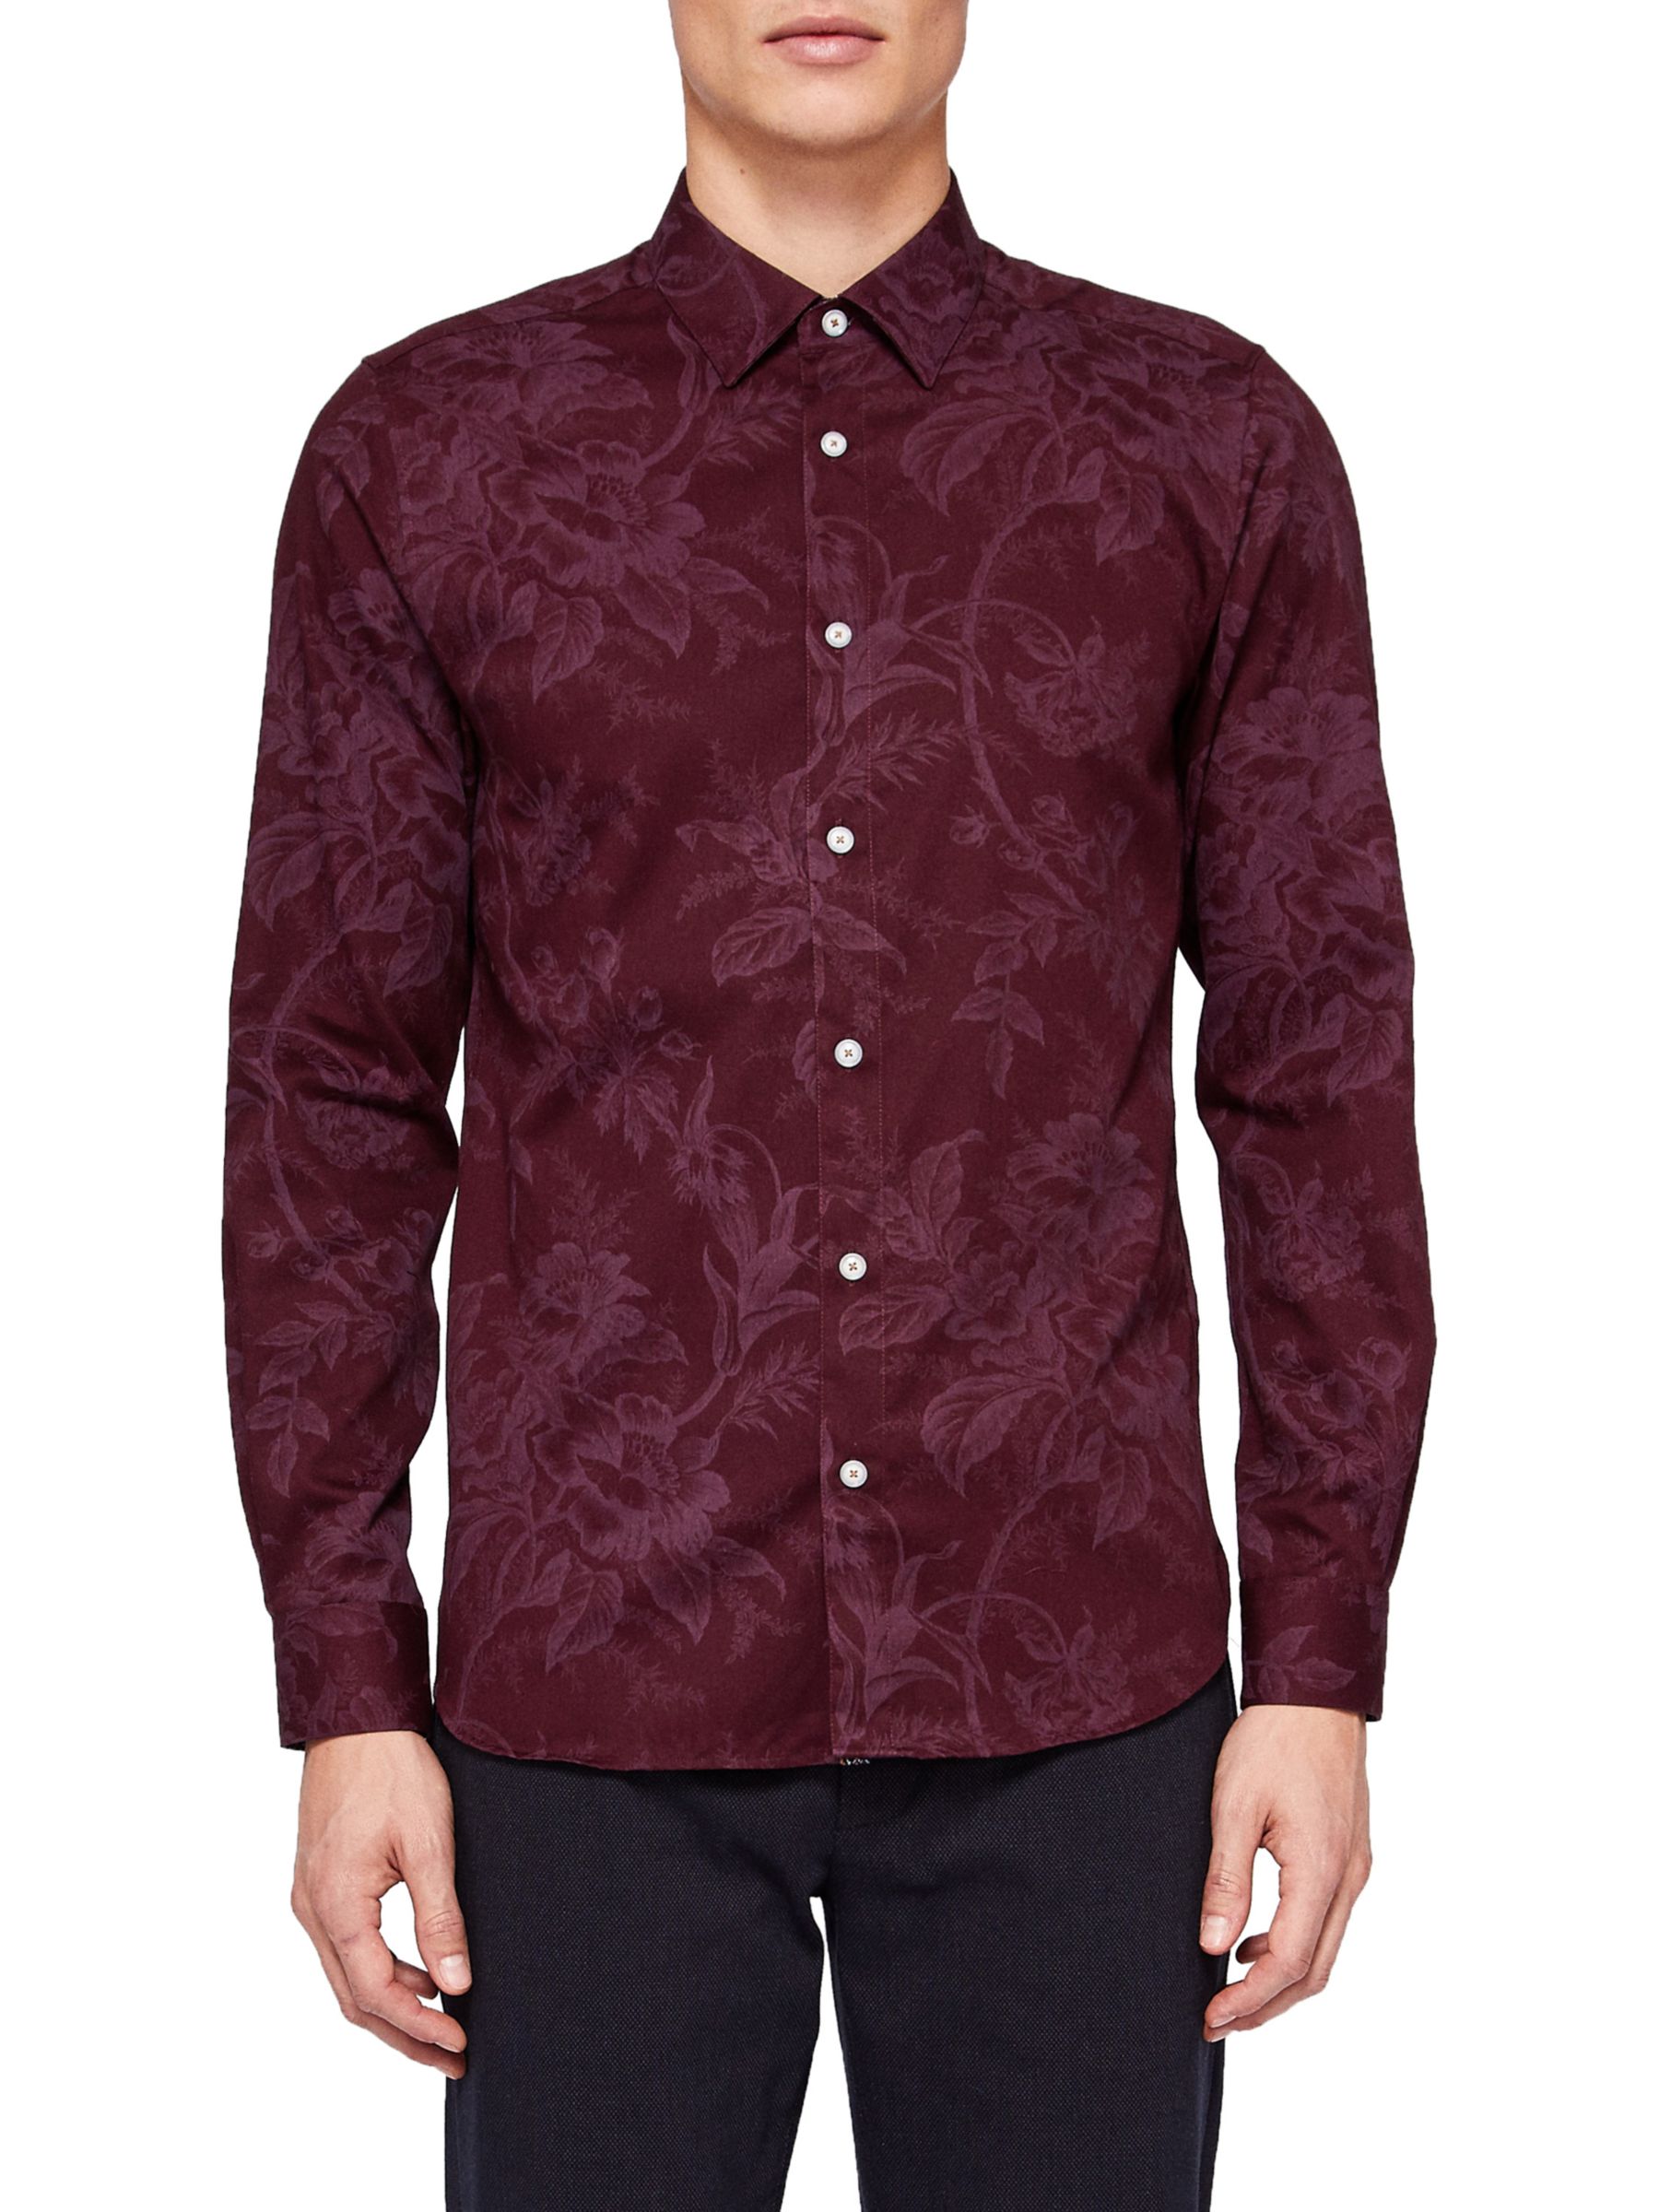 Ted Baker Tulls Floral Printed Long Sleeve Shirt